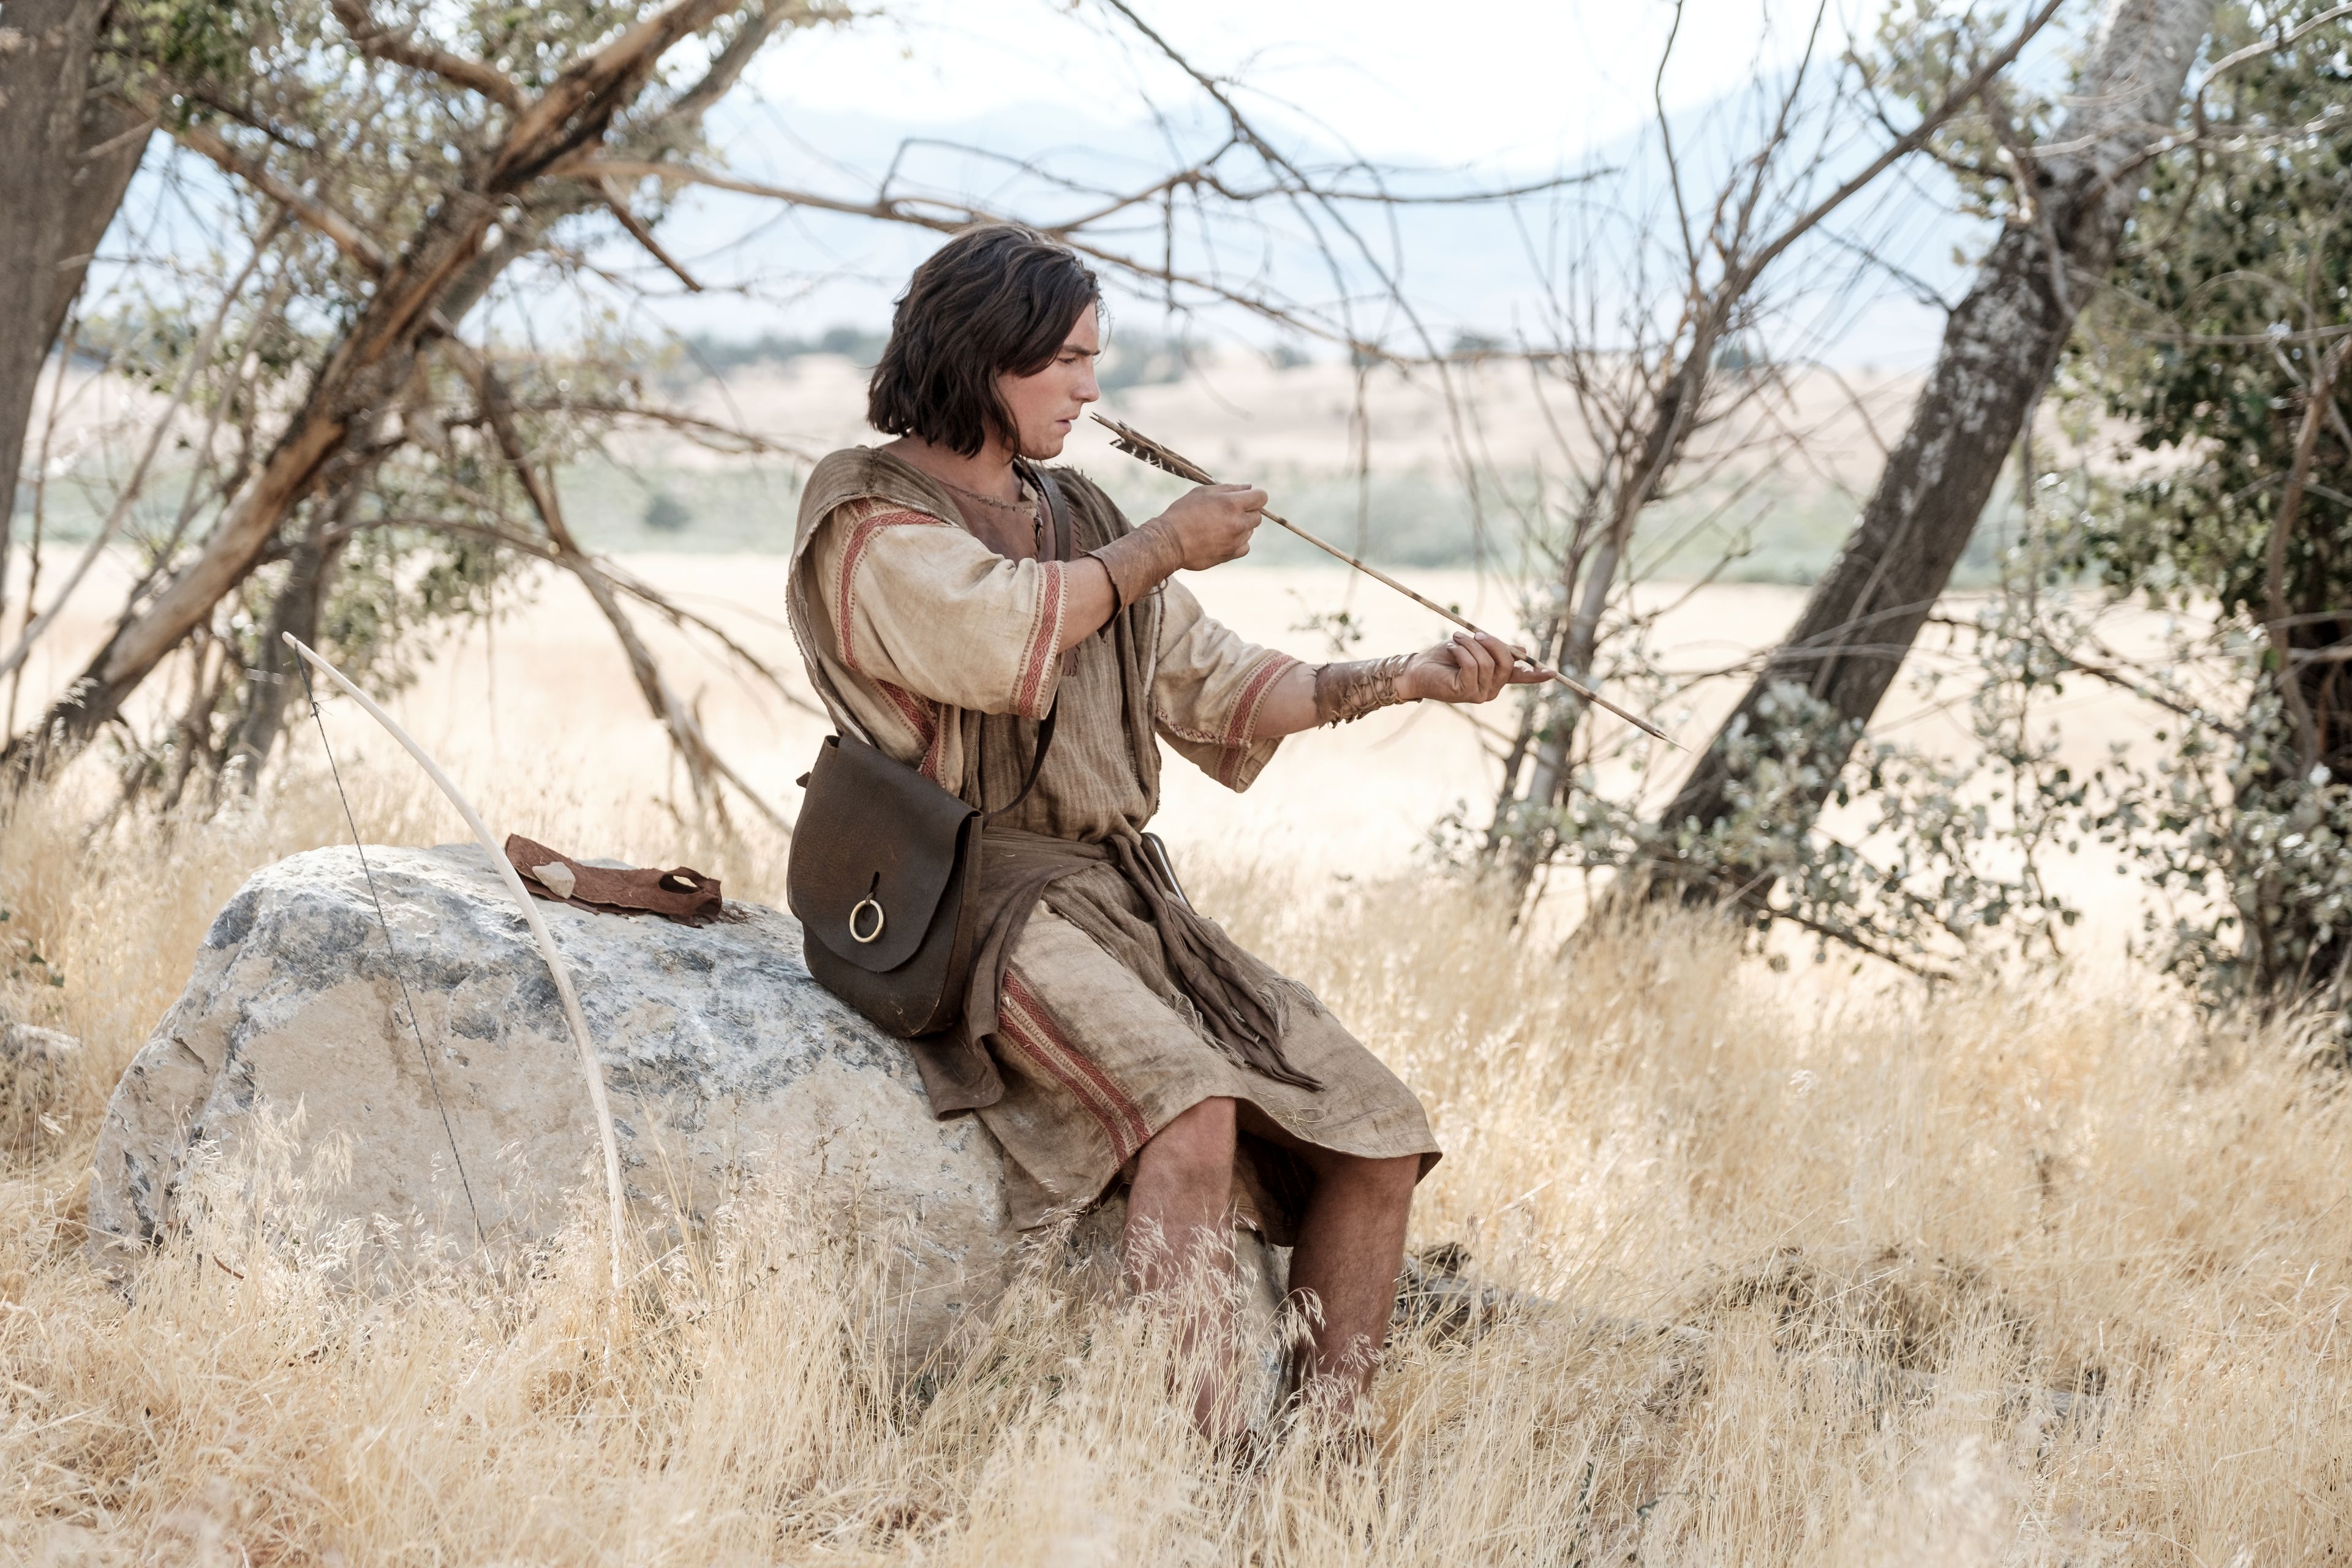 Nephi makes a bow and arrow in the wilderness.